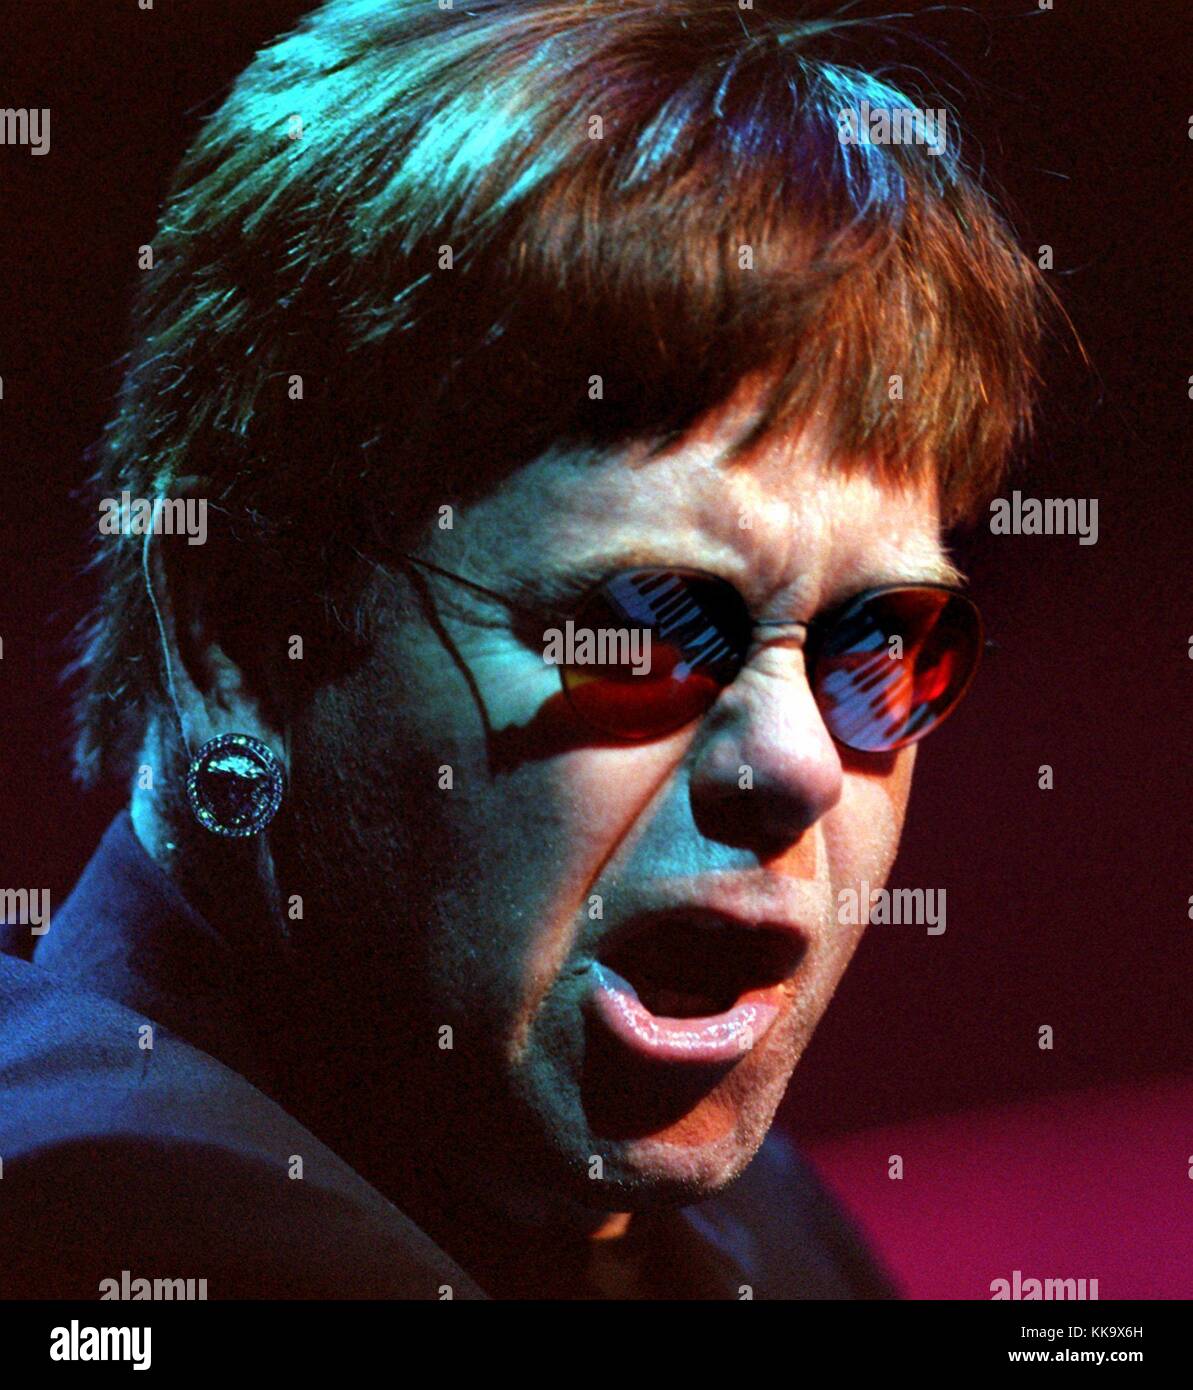 The famous pop singer Elton John performing on stage in the Frankfurt Festival Hall on the occasion of his 'The Big Picture' Tour, pictured on 18th November 1998.  | usage worldwide Stock Photo